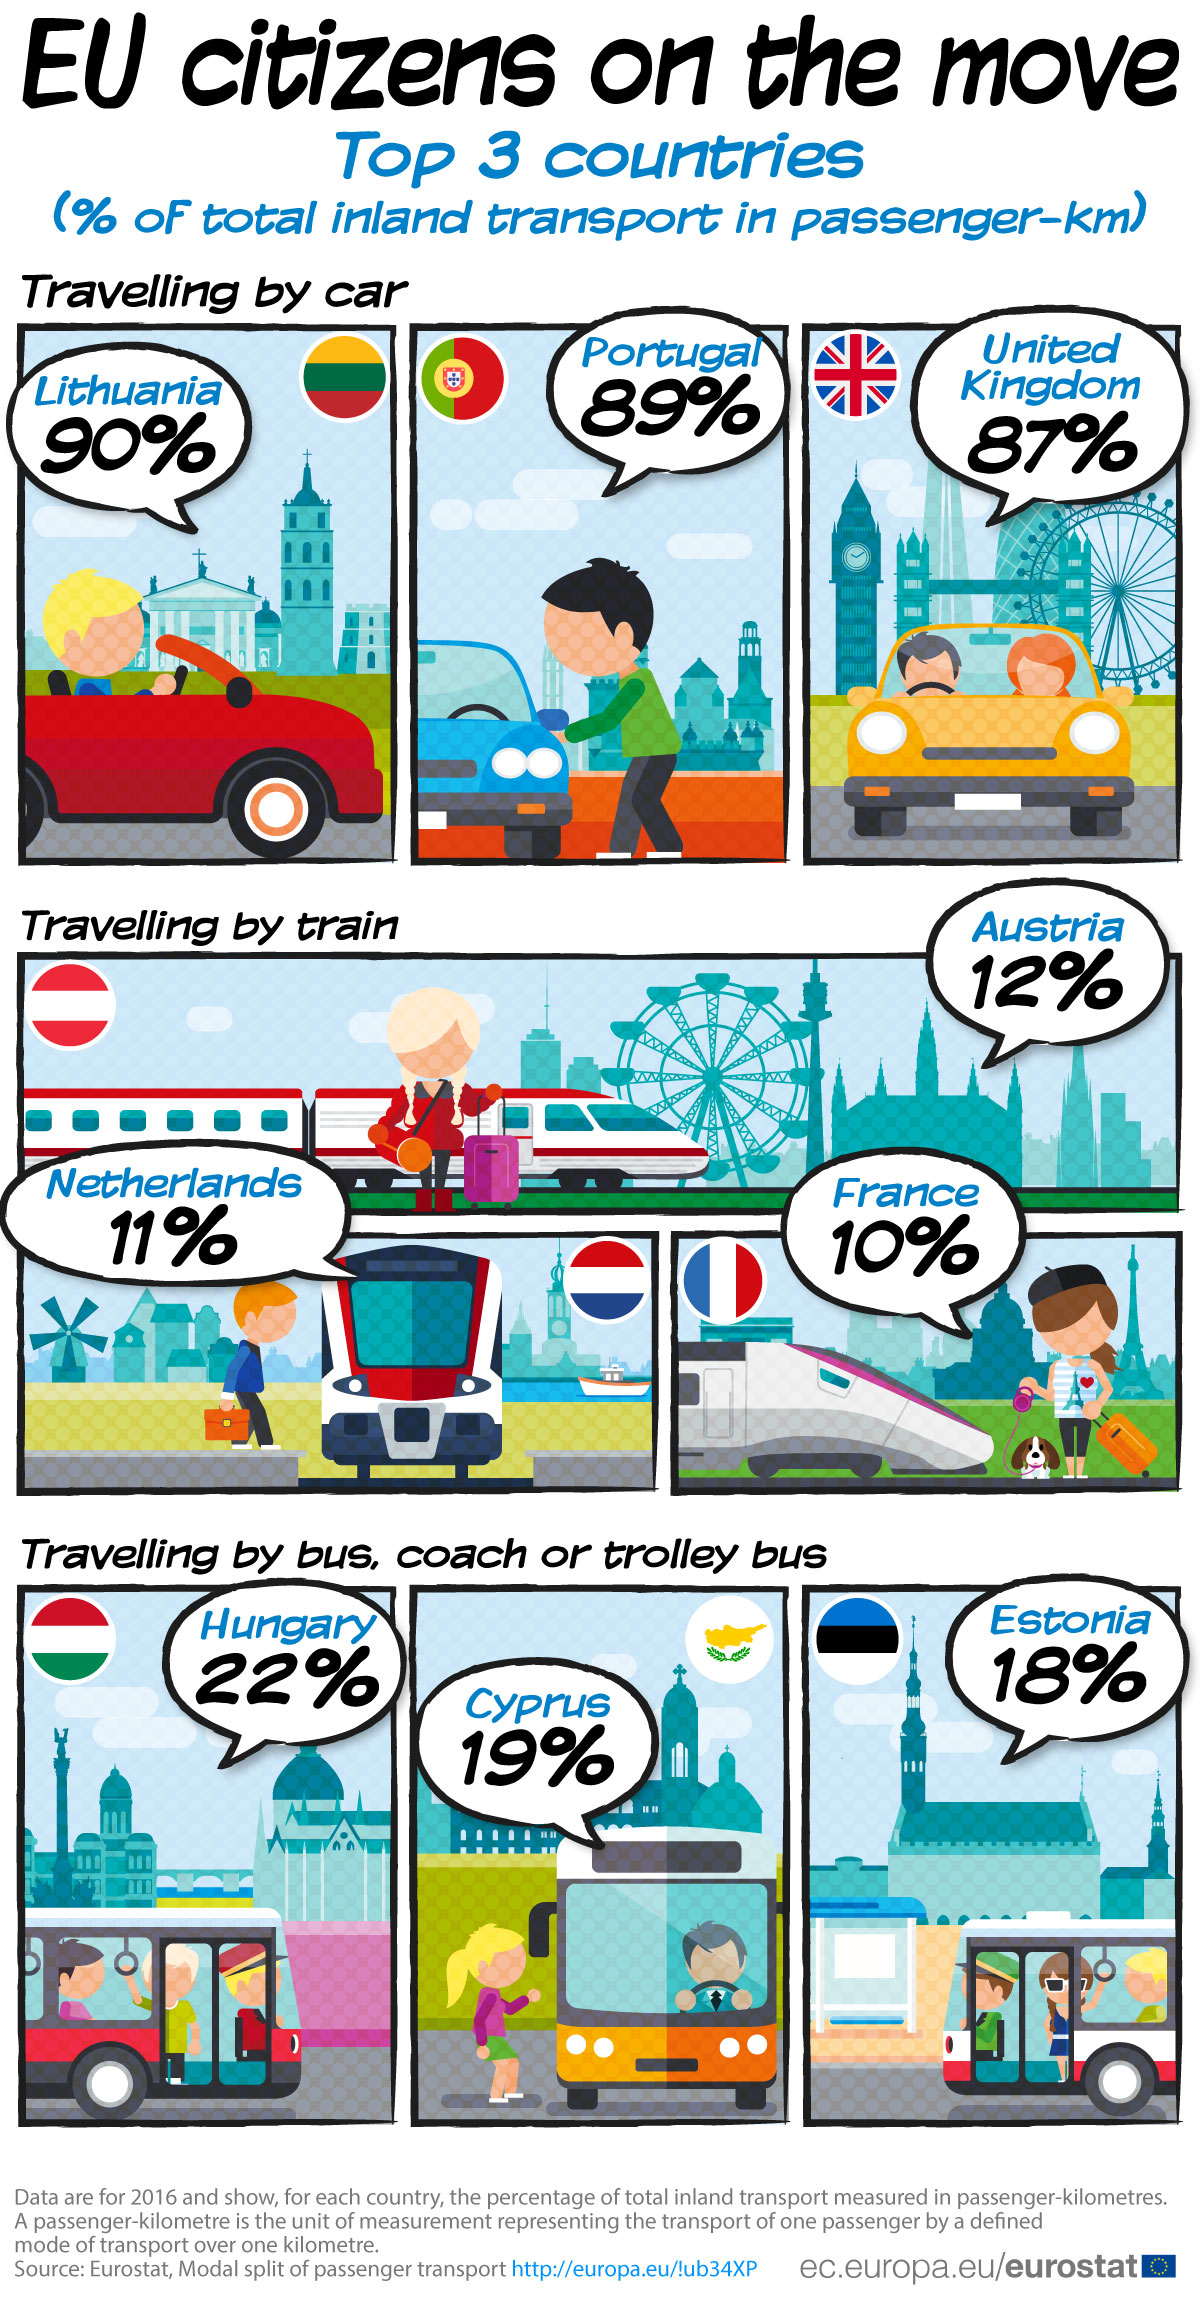 Infographic: Car, train, bus travel - top countries